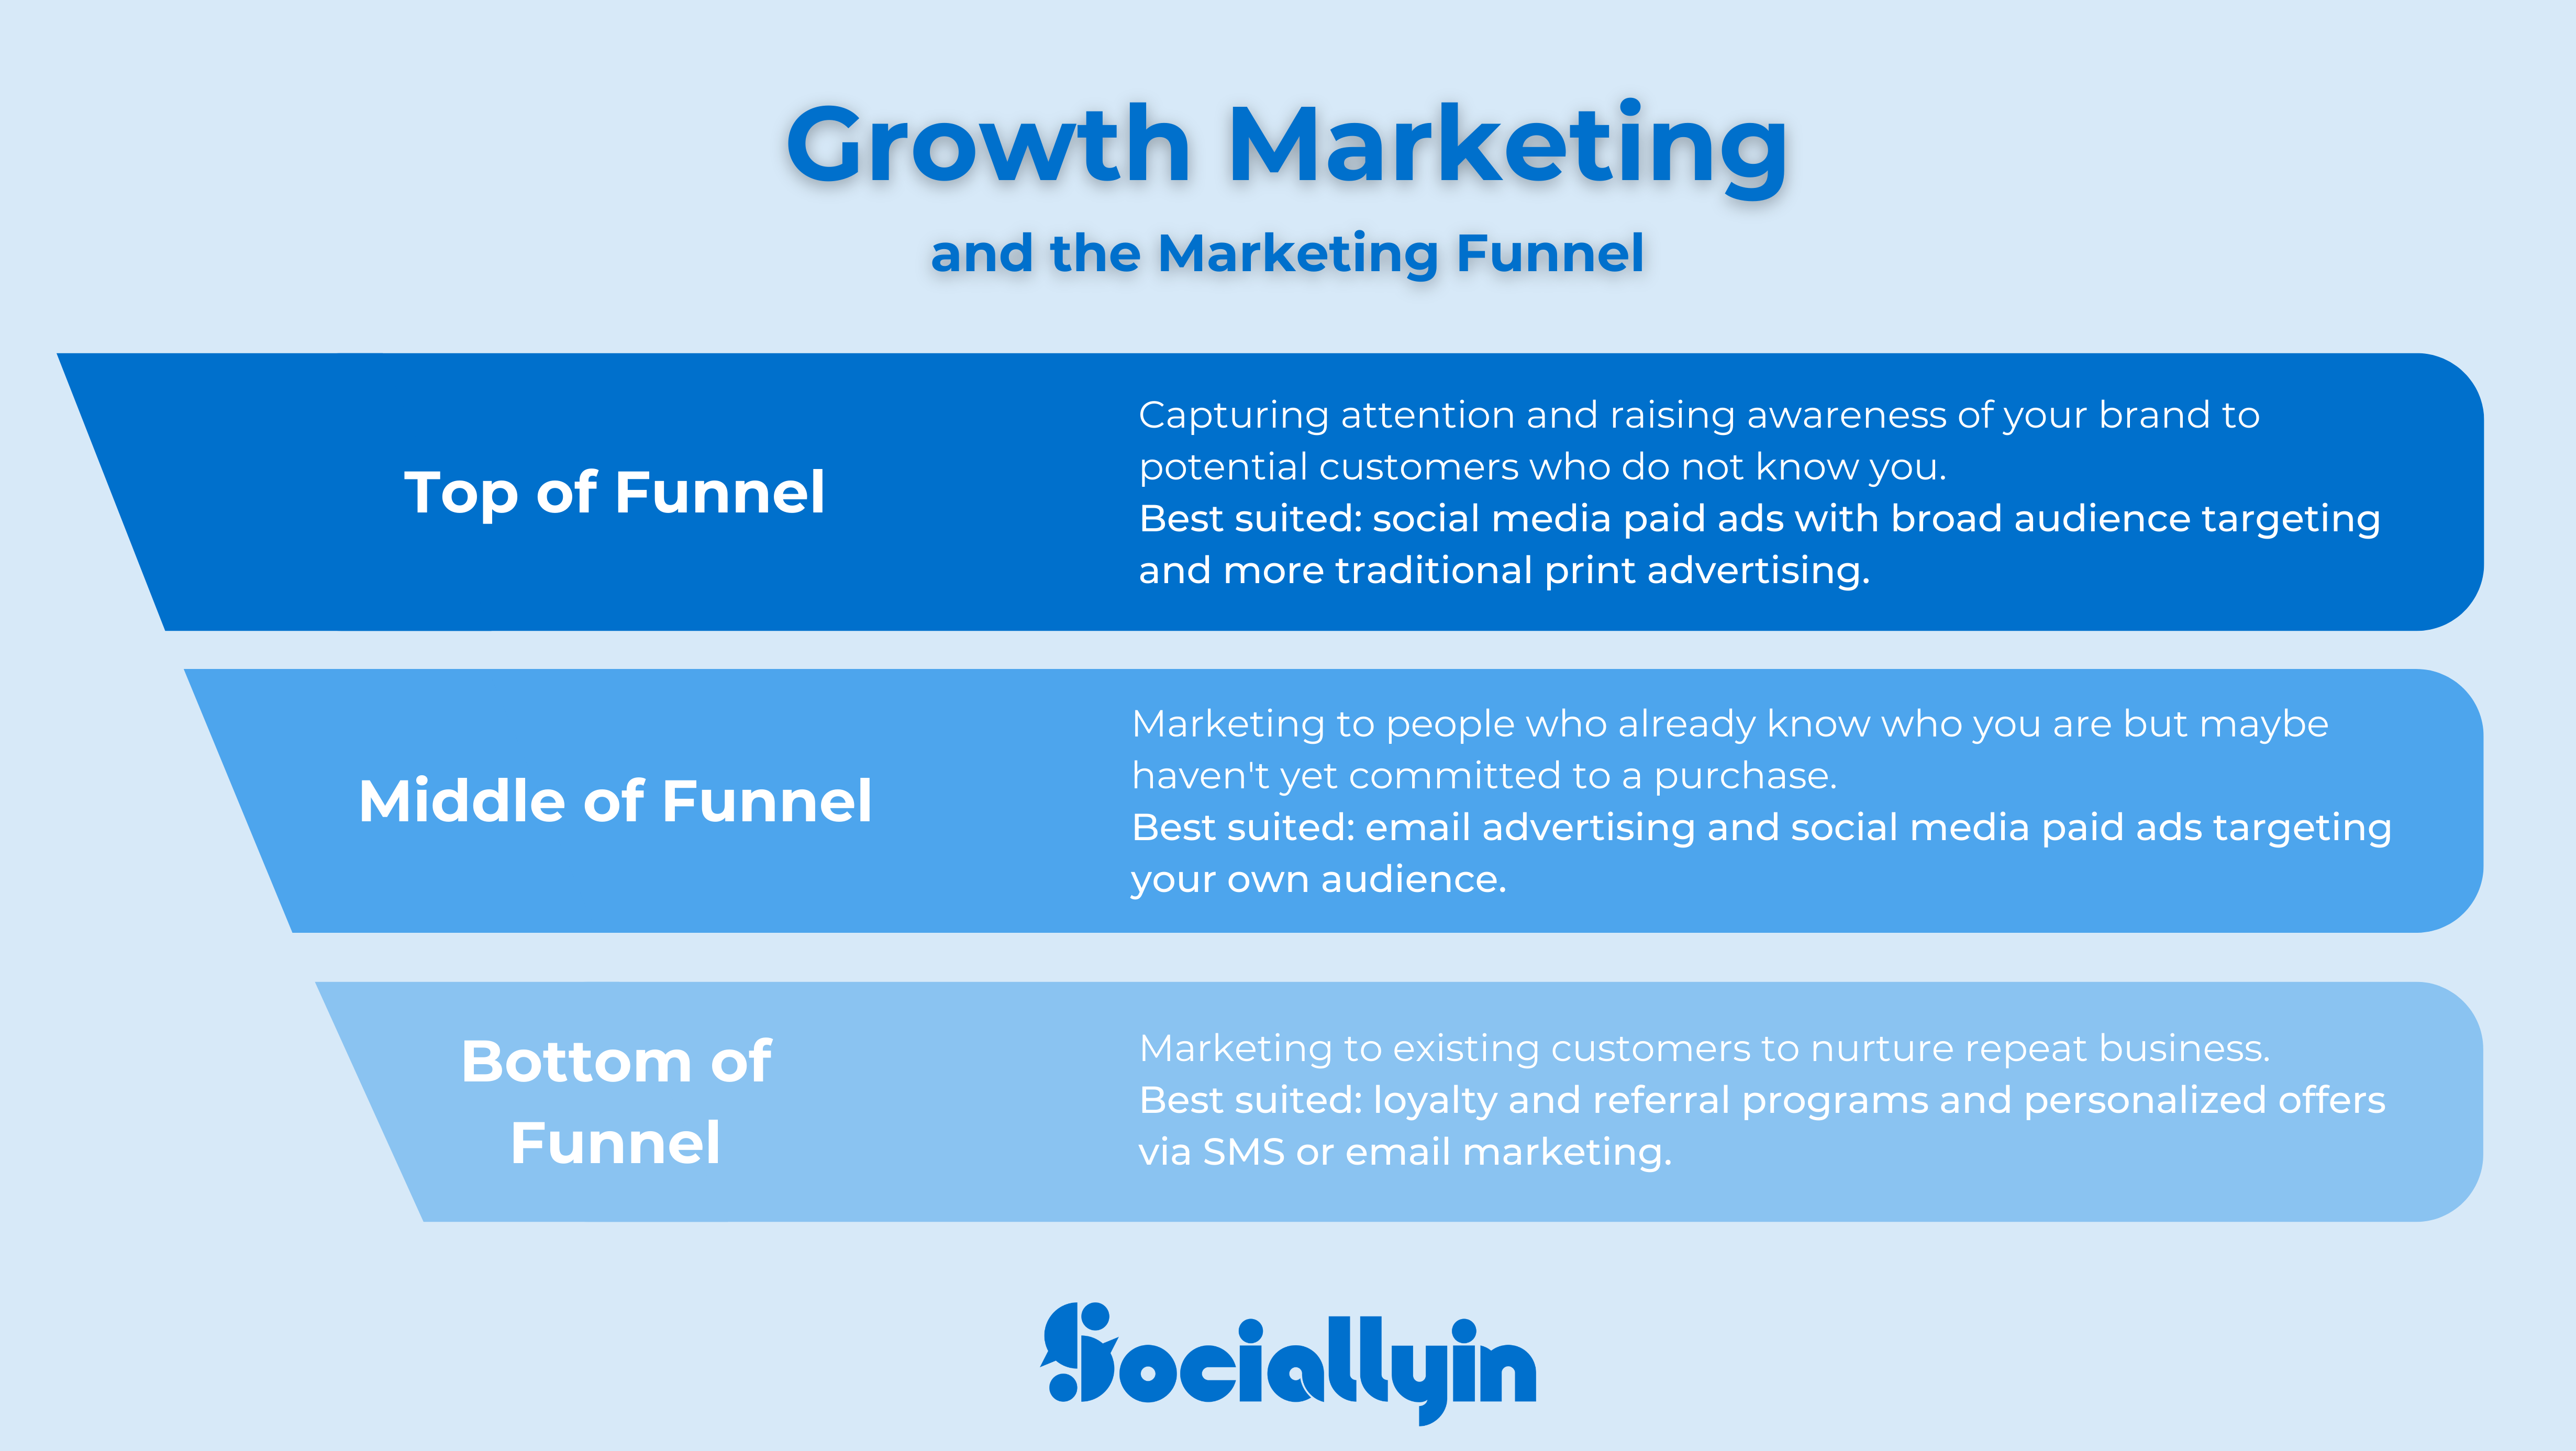 growth-marketing-and-the-marketing-funnel-infographic